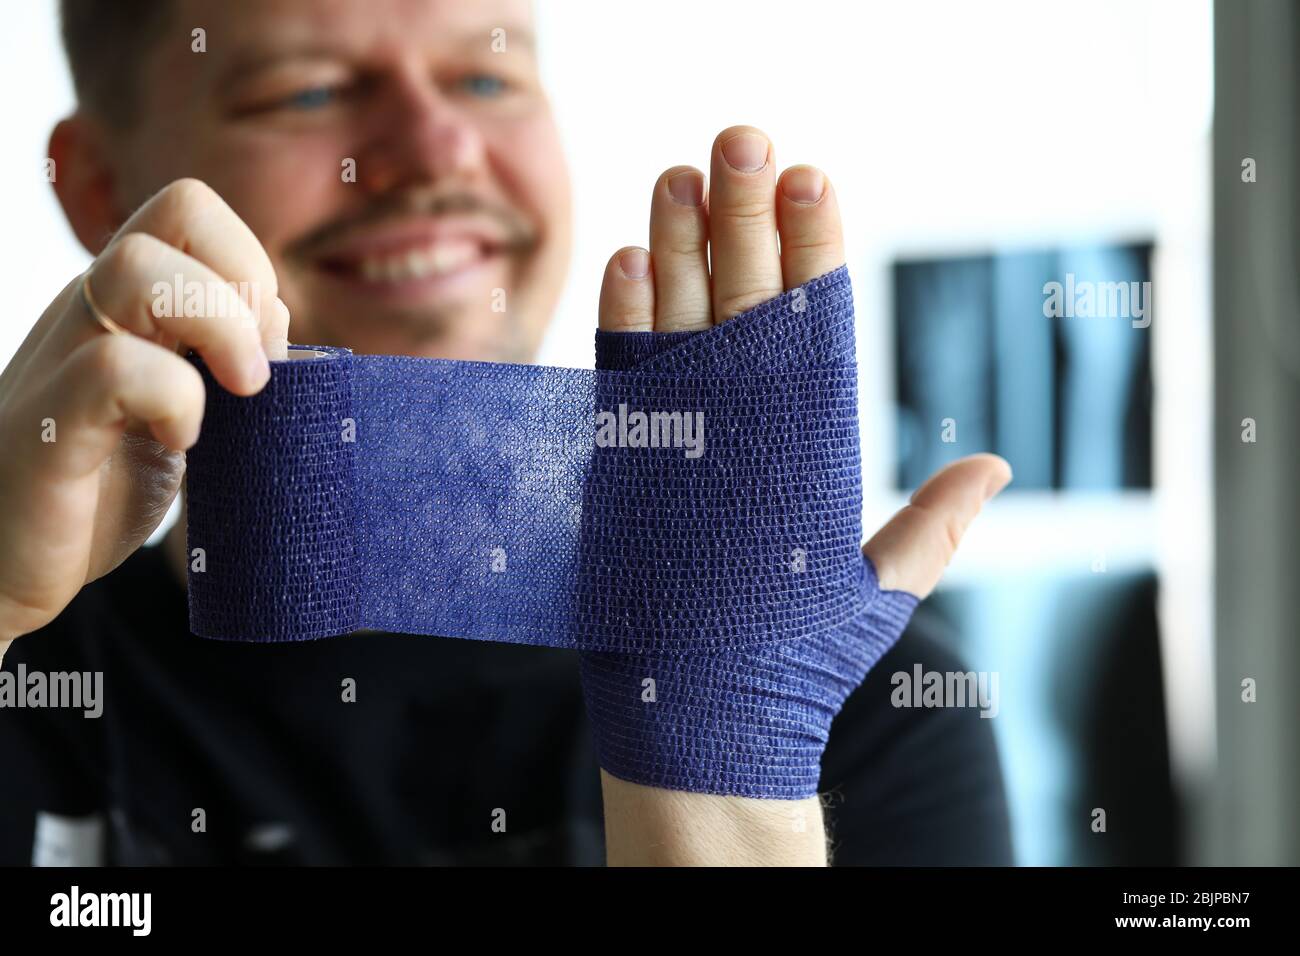 Fracture bone and x ray image Stock Photo